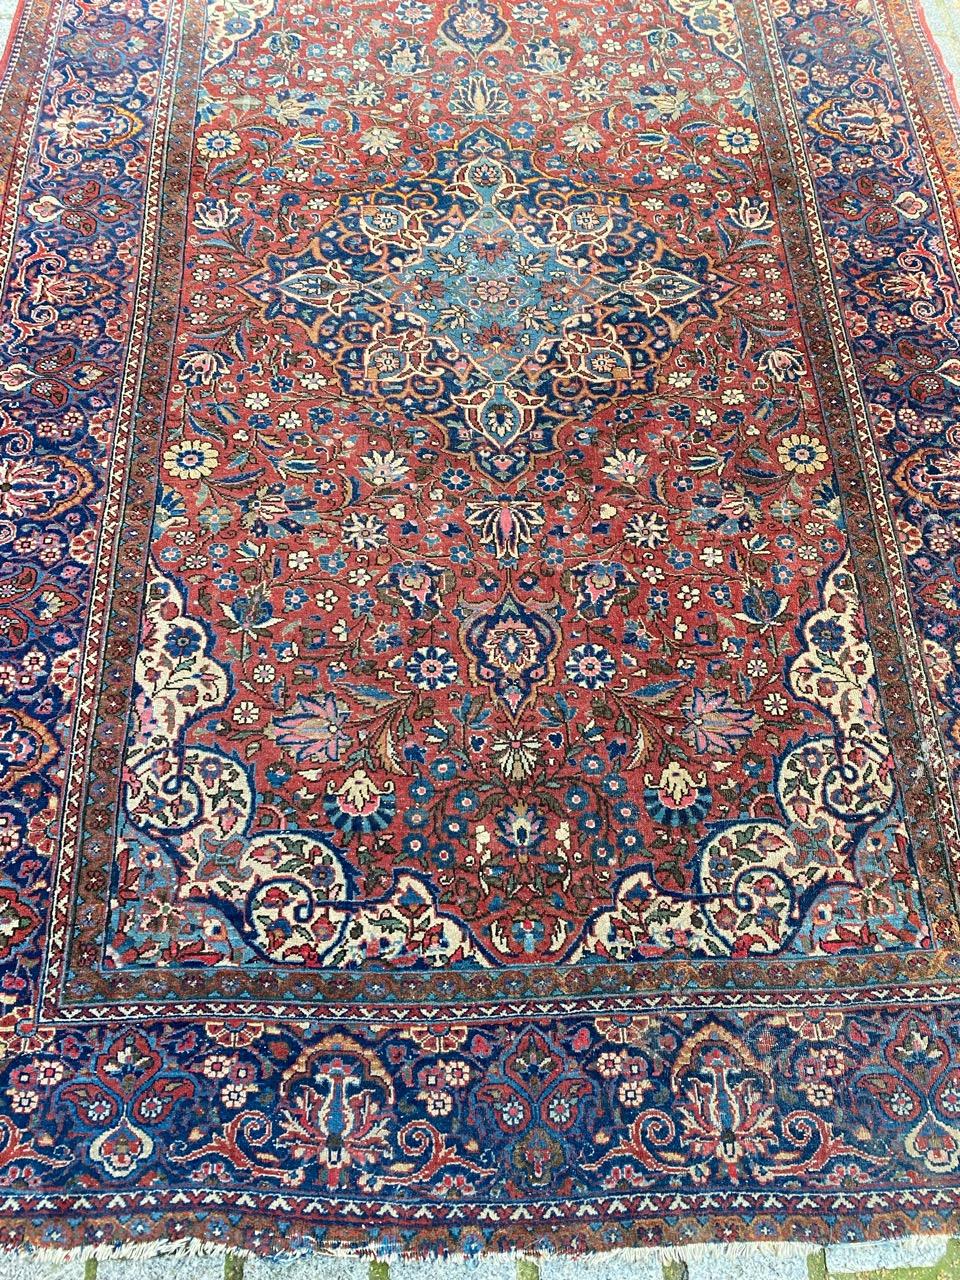 Very beautiful early 20th century kashan rug with beautiful classical floral design and nice natural colors, entirely and finely hand knotted with wool velvet on cotton foundation.

✨✨✨
